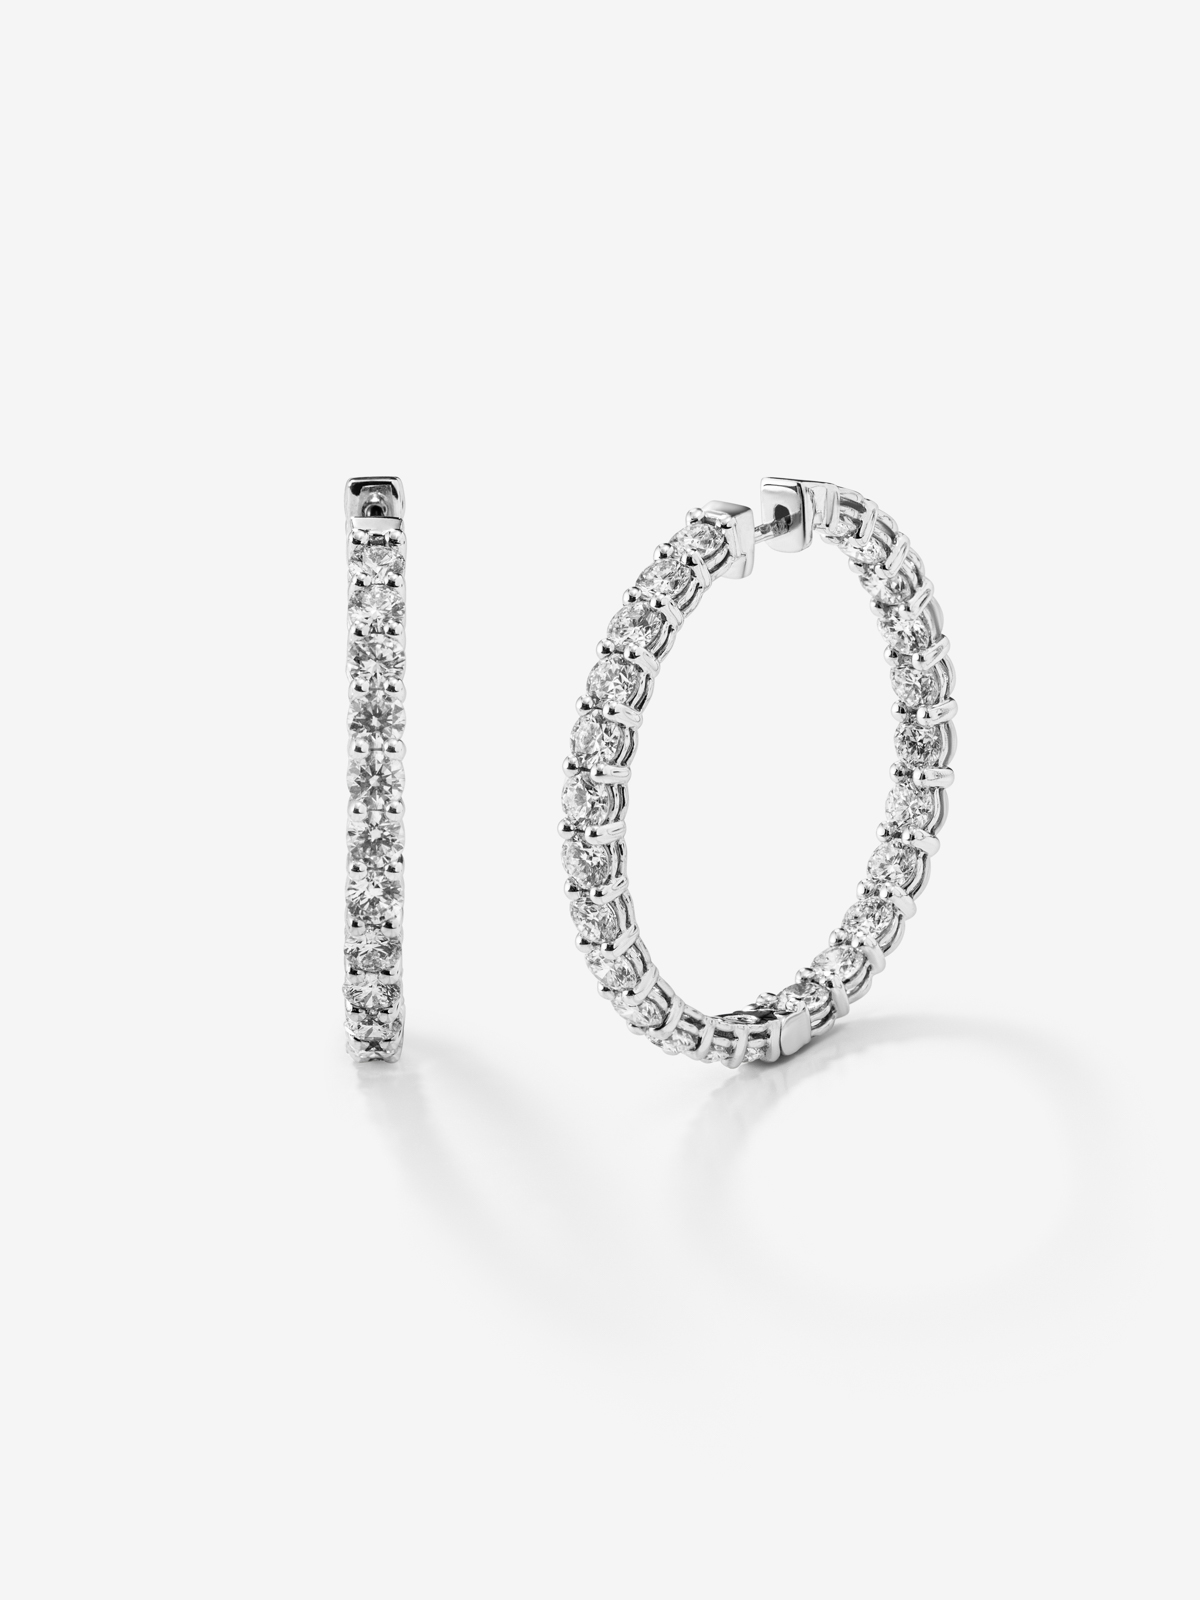 18K White Gold Hoop Earrings with Claw-set Diamonds